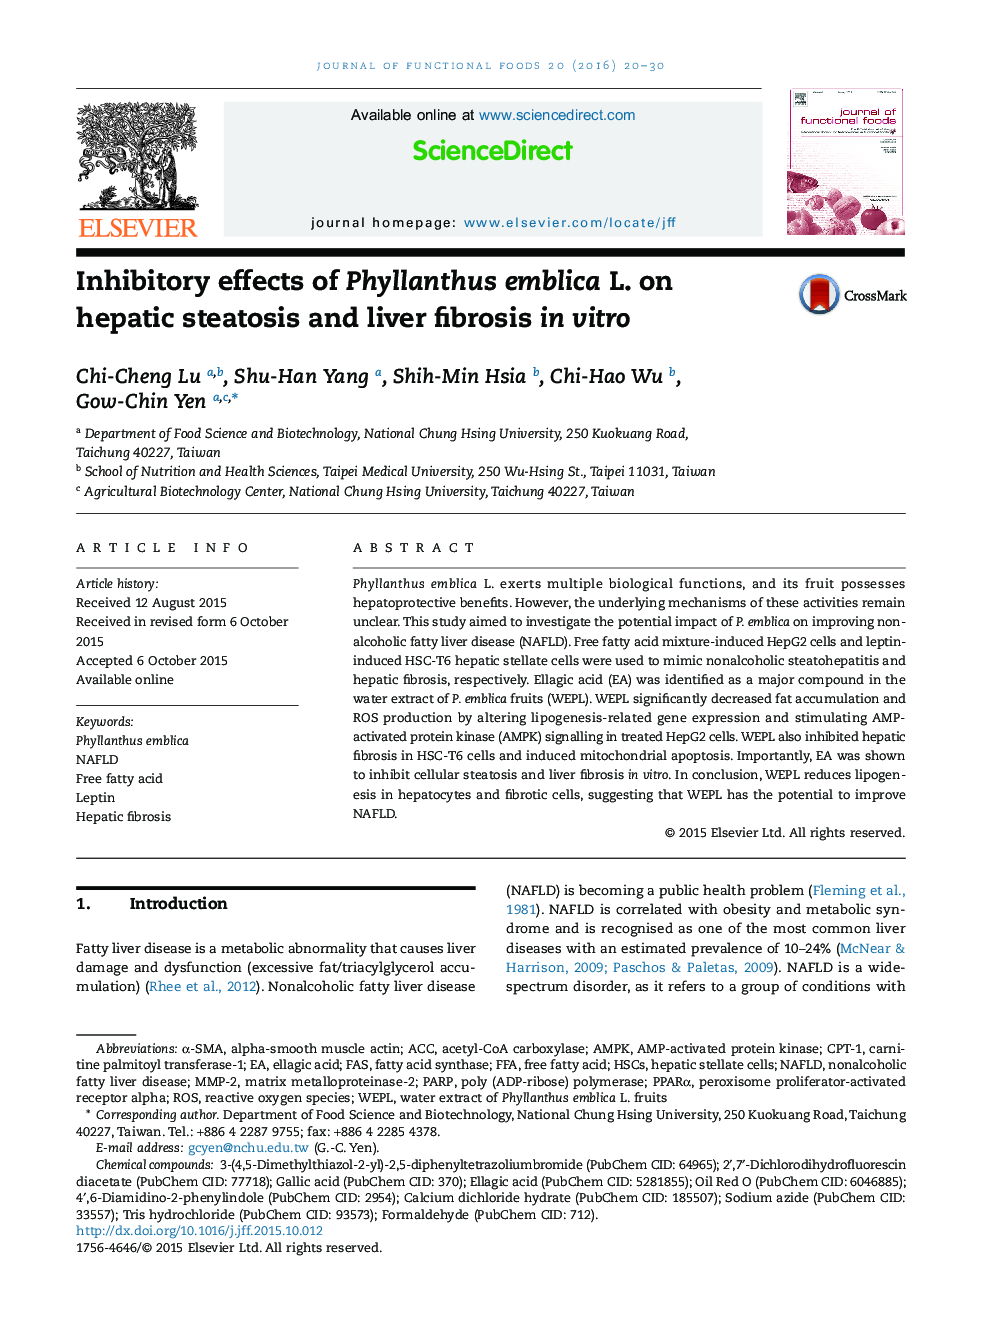 Inhibitory effects of Phyllanthus emblica L. on hepatic steatosis and liver fibrosis in vitro